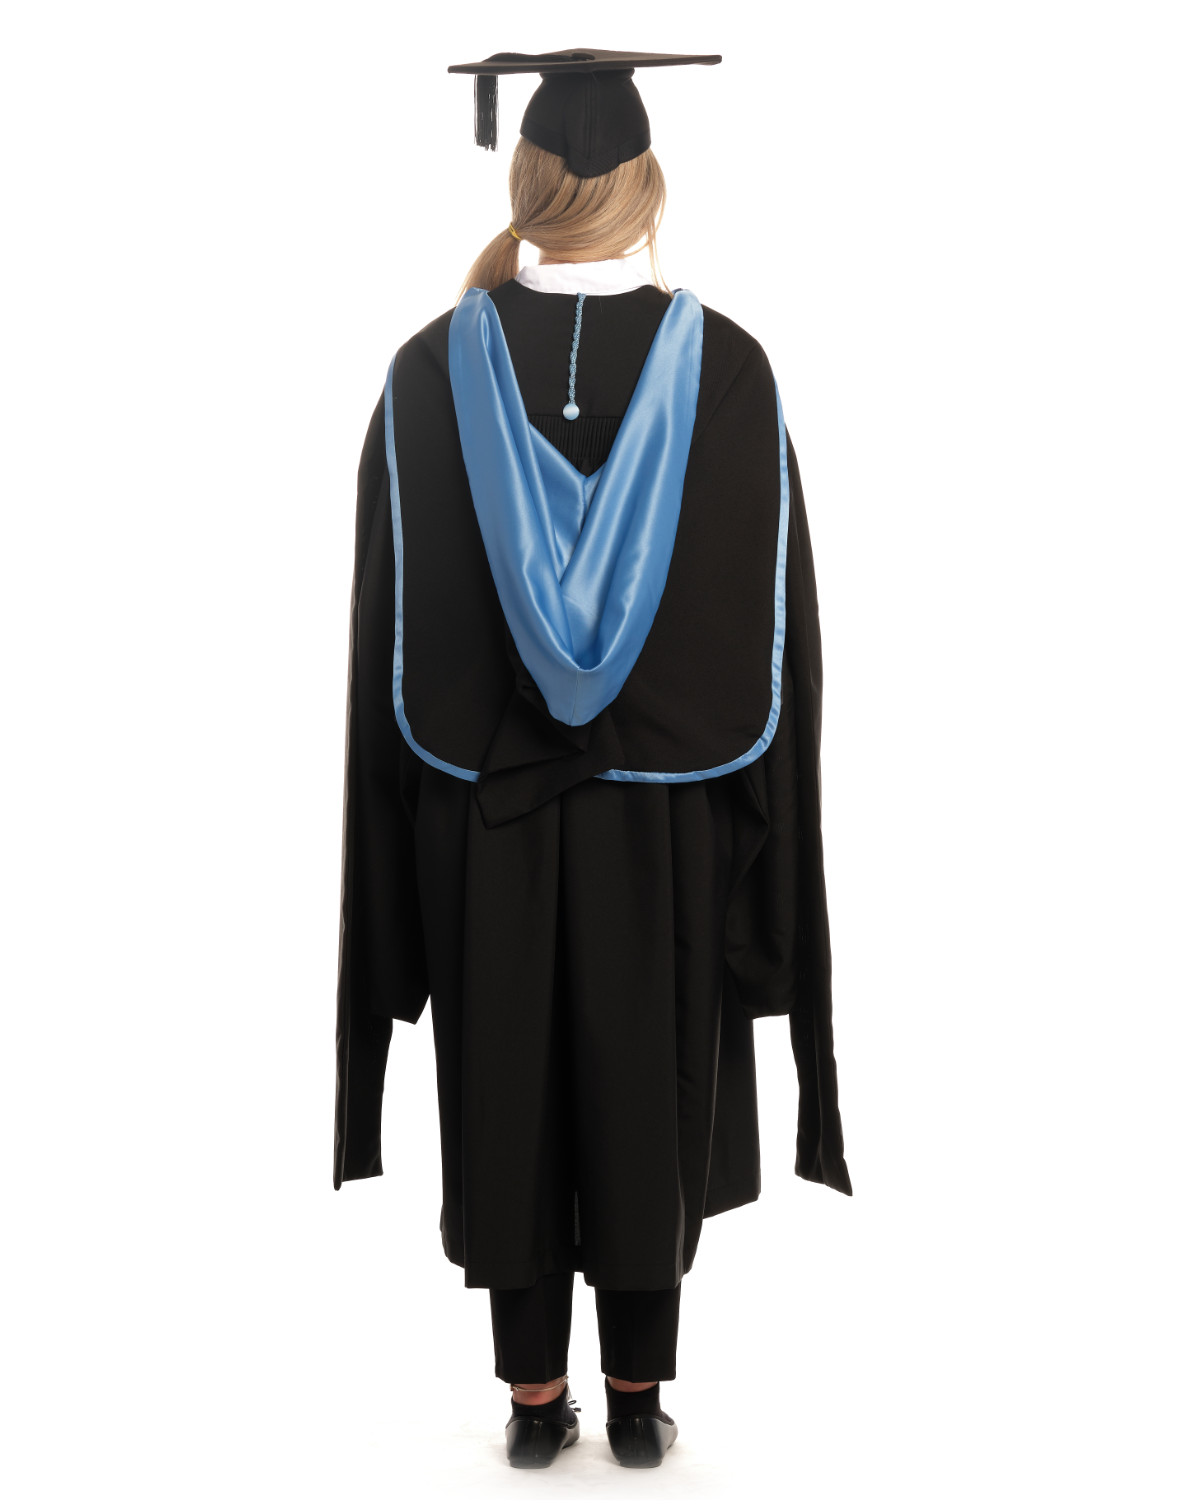 University of Southampton | LLM | Master of Laws Gown, Cap and Hood Set